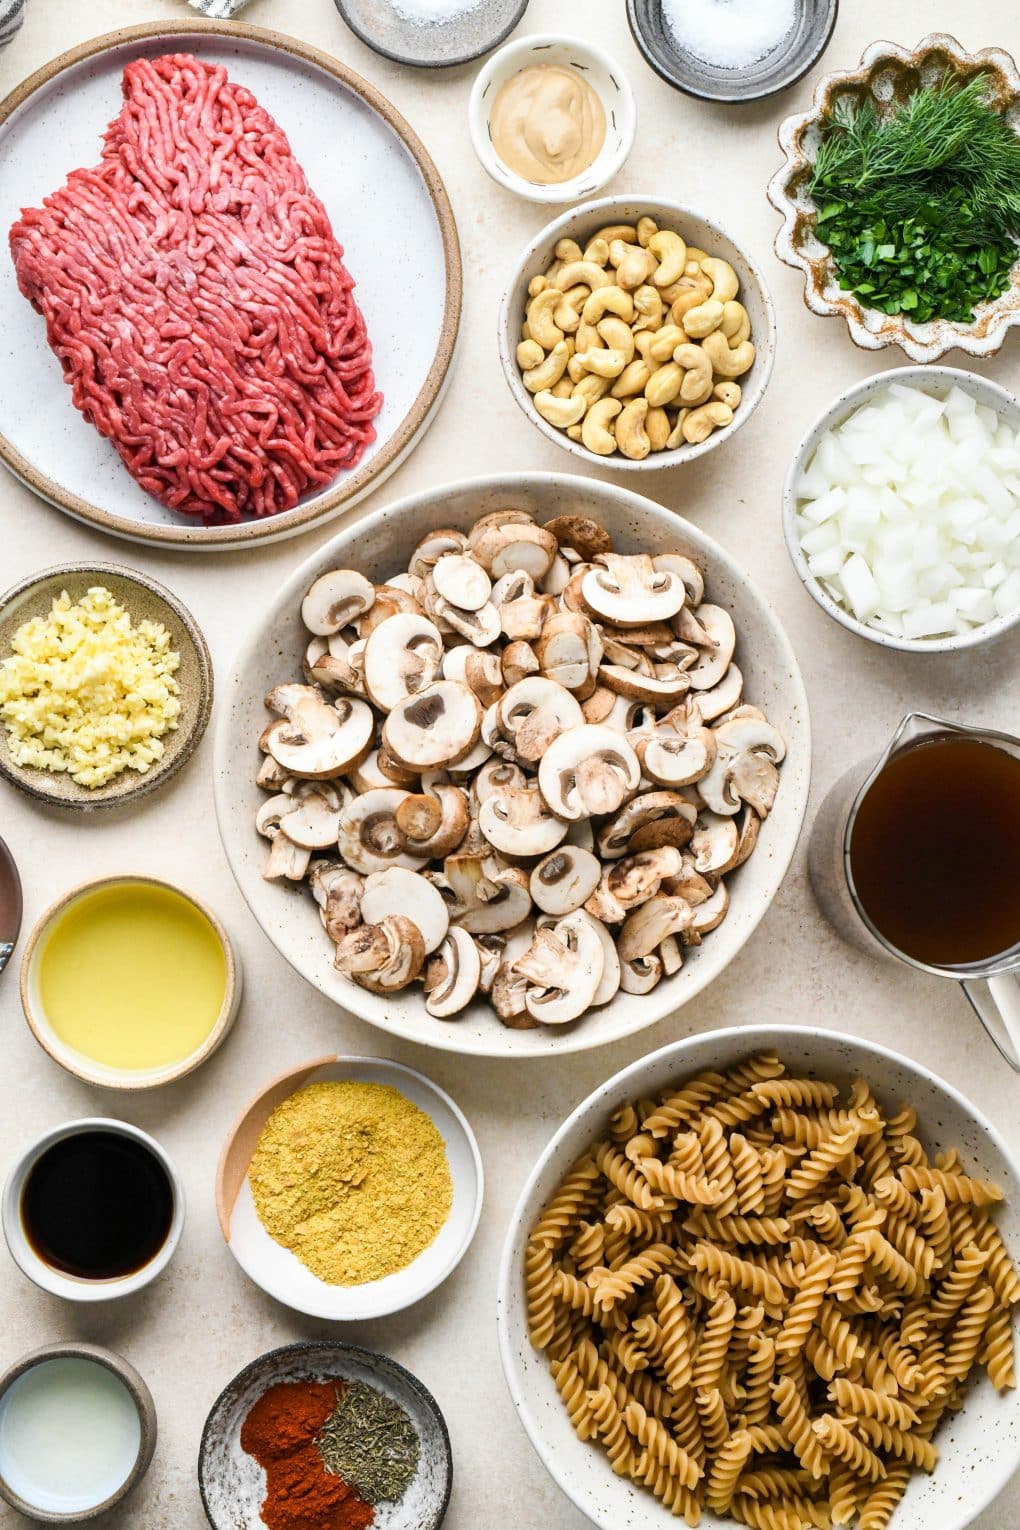 Ingredients for dairy free beef stroganoff in various ceramic dishes on a cream colored background.